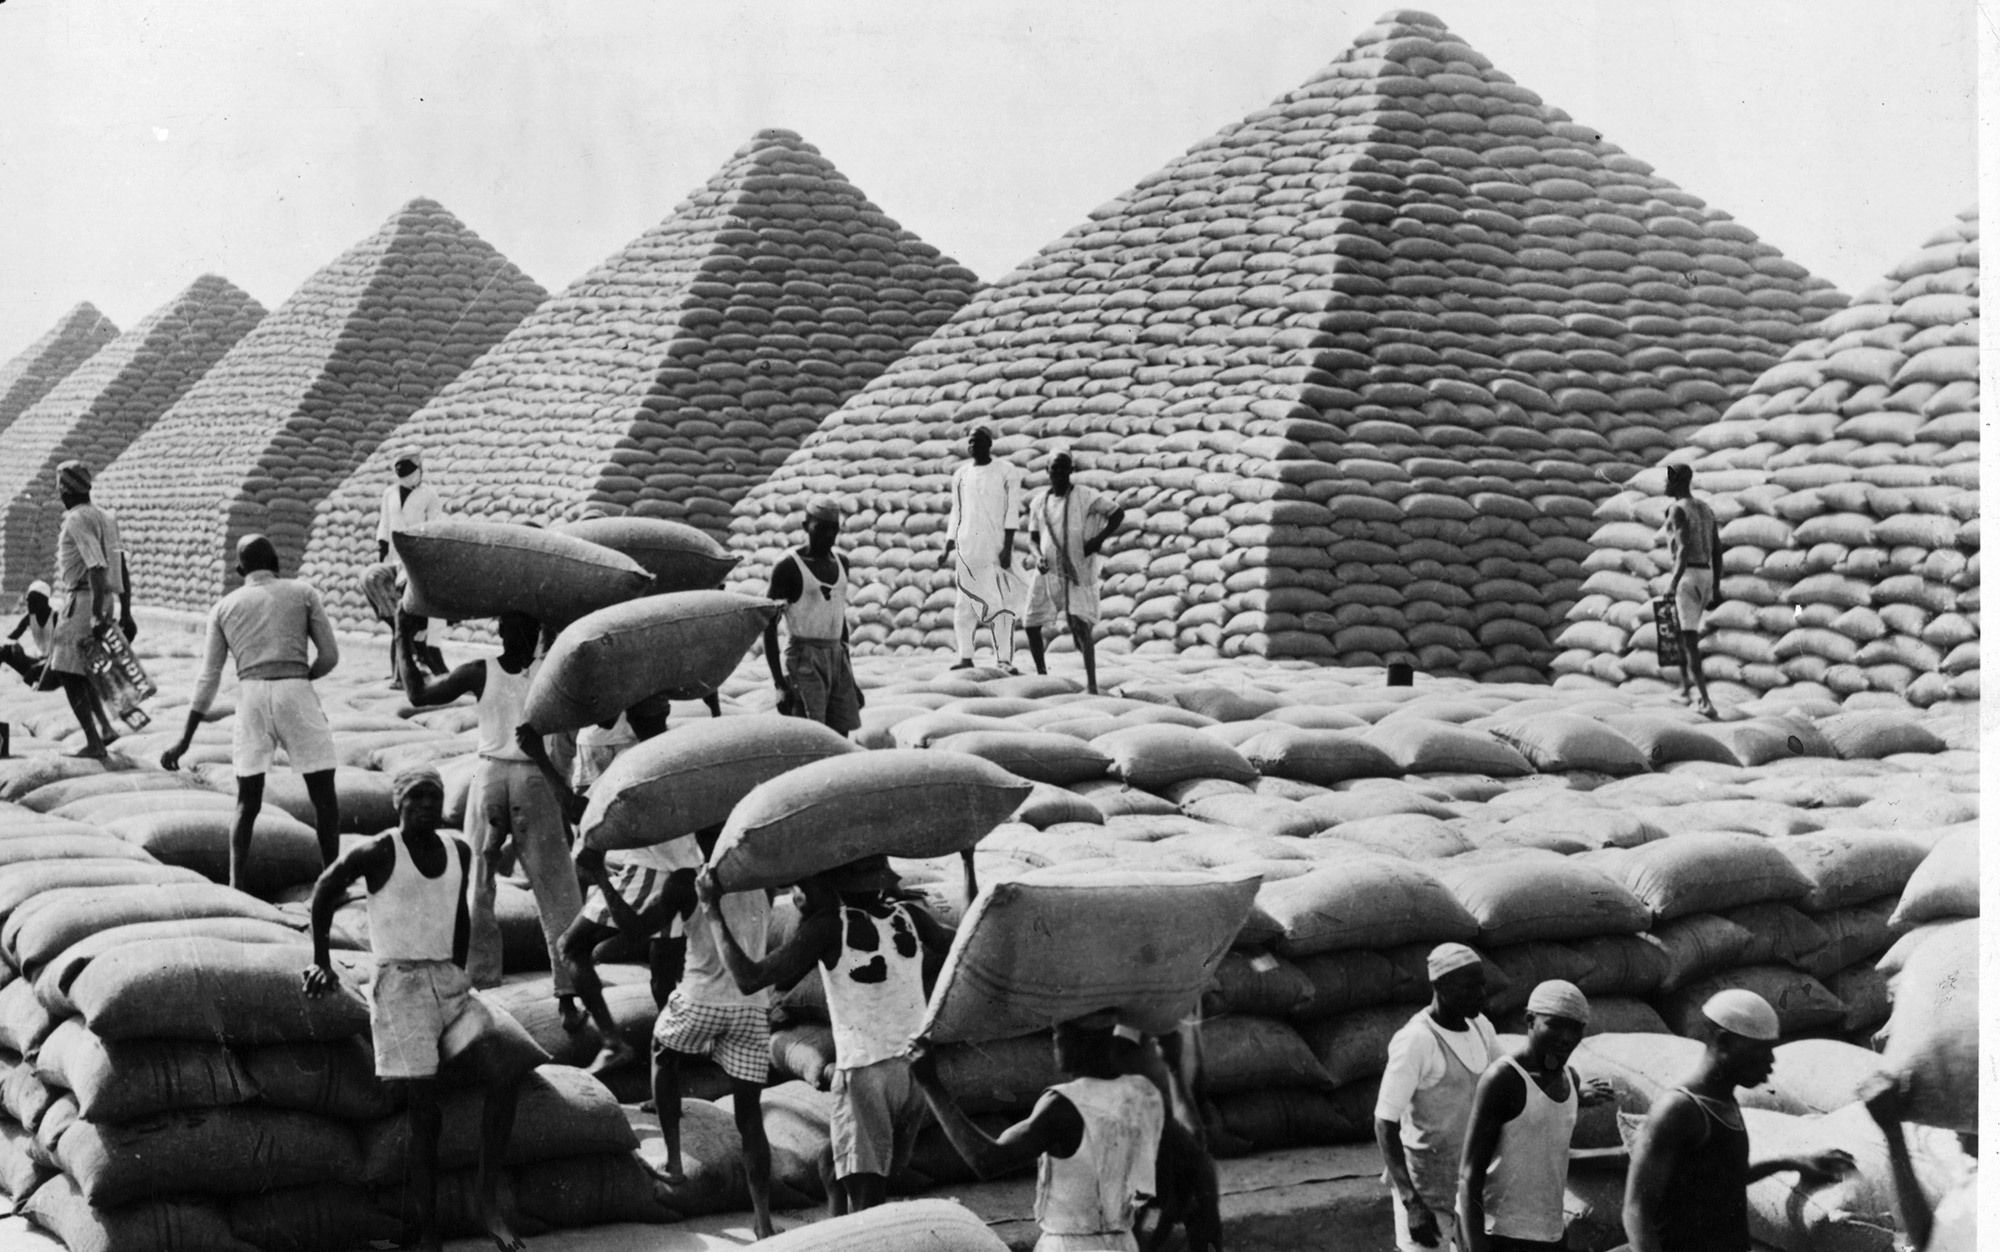 The Economic Boom: A Look into West African Economy in the 19th Century